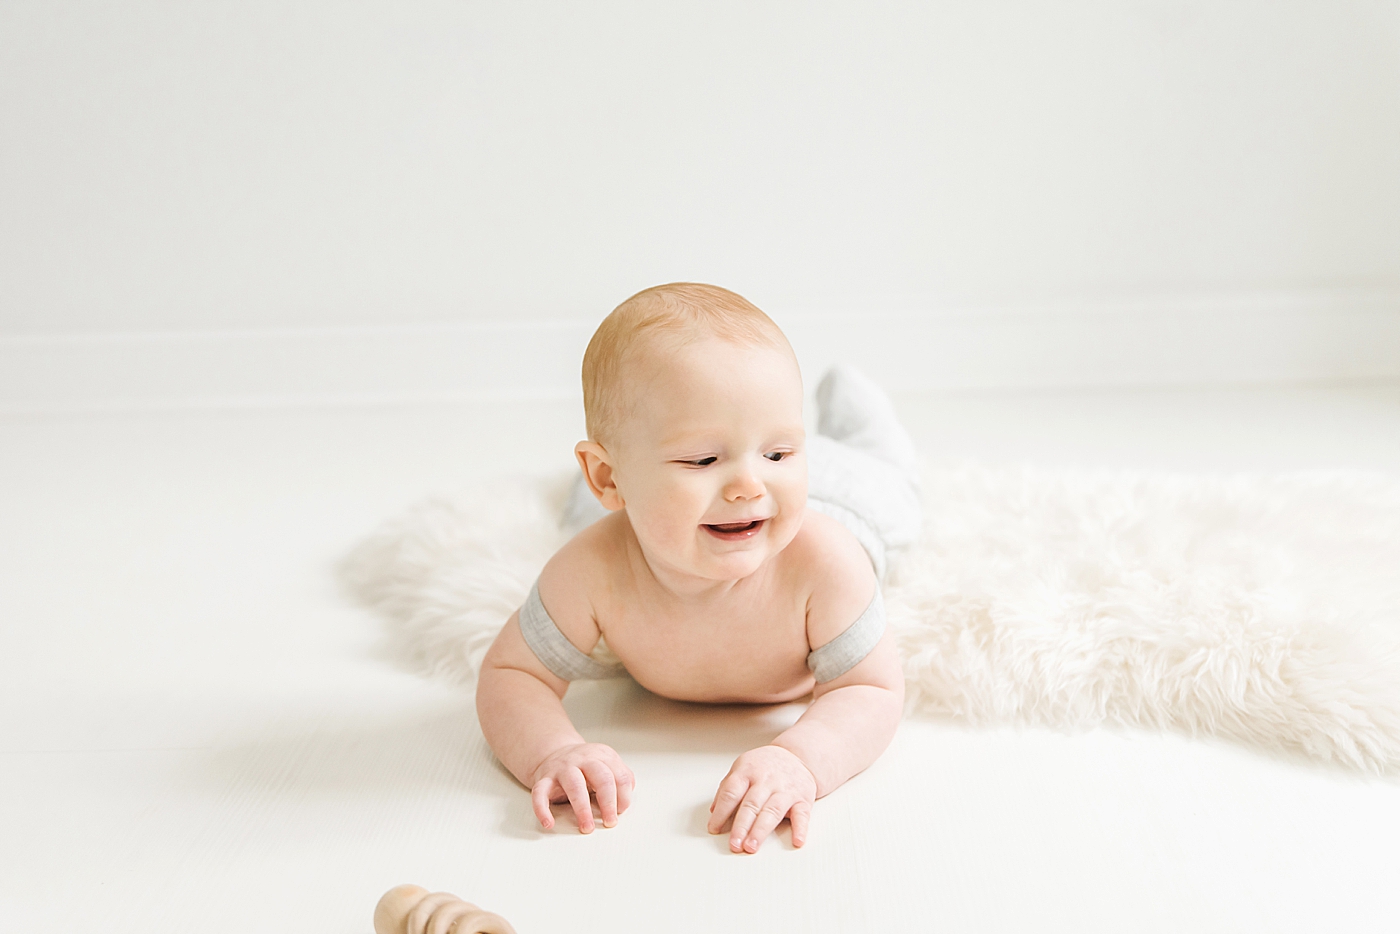 Baby boy smiling laying on a fuzzy rug | Photo by Anna Wisjo Photography 